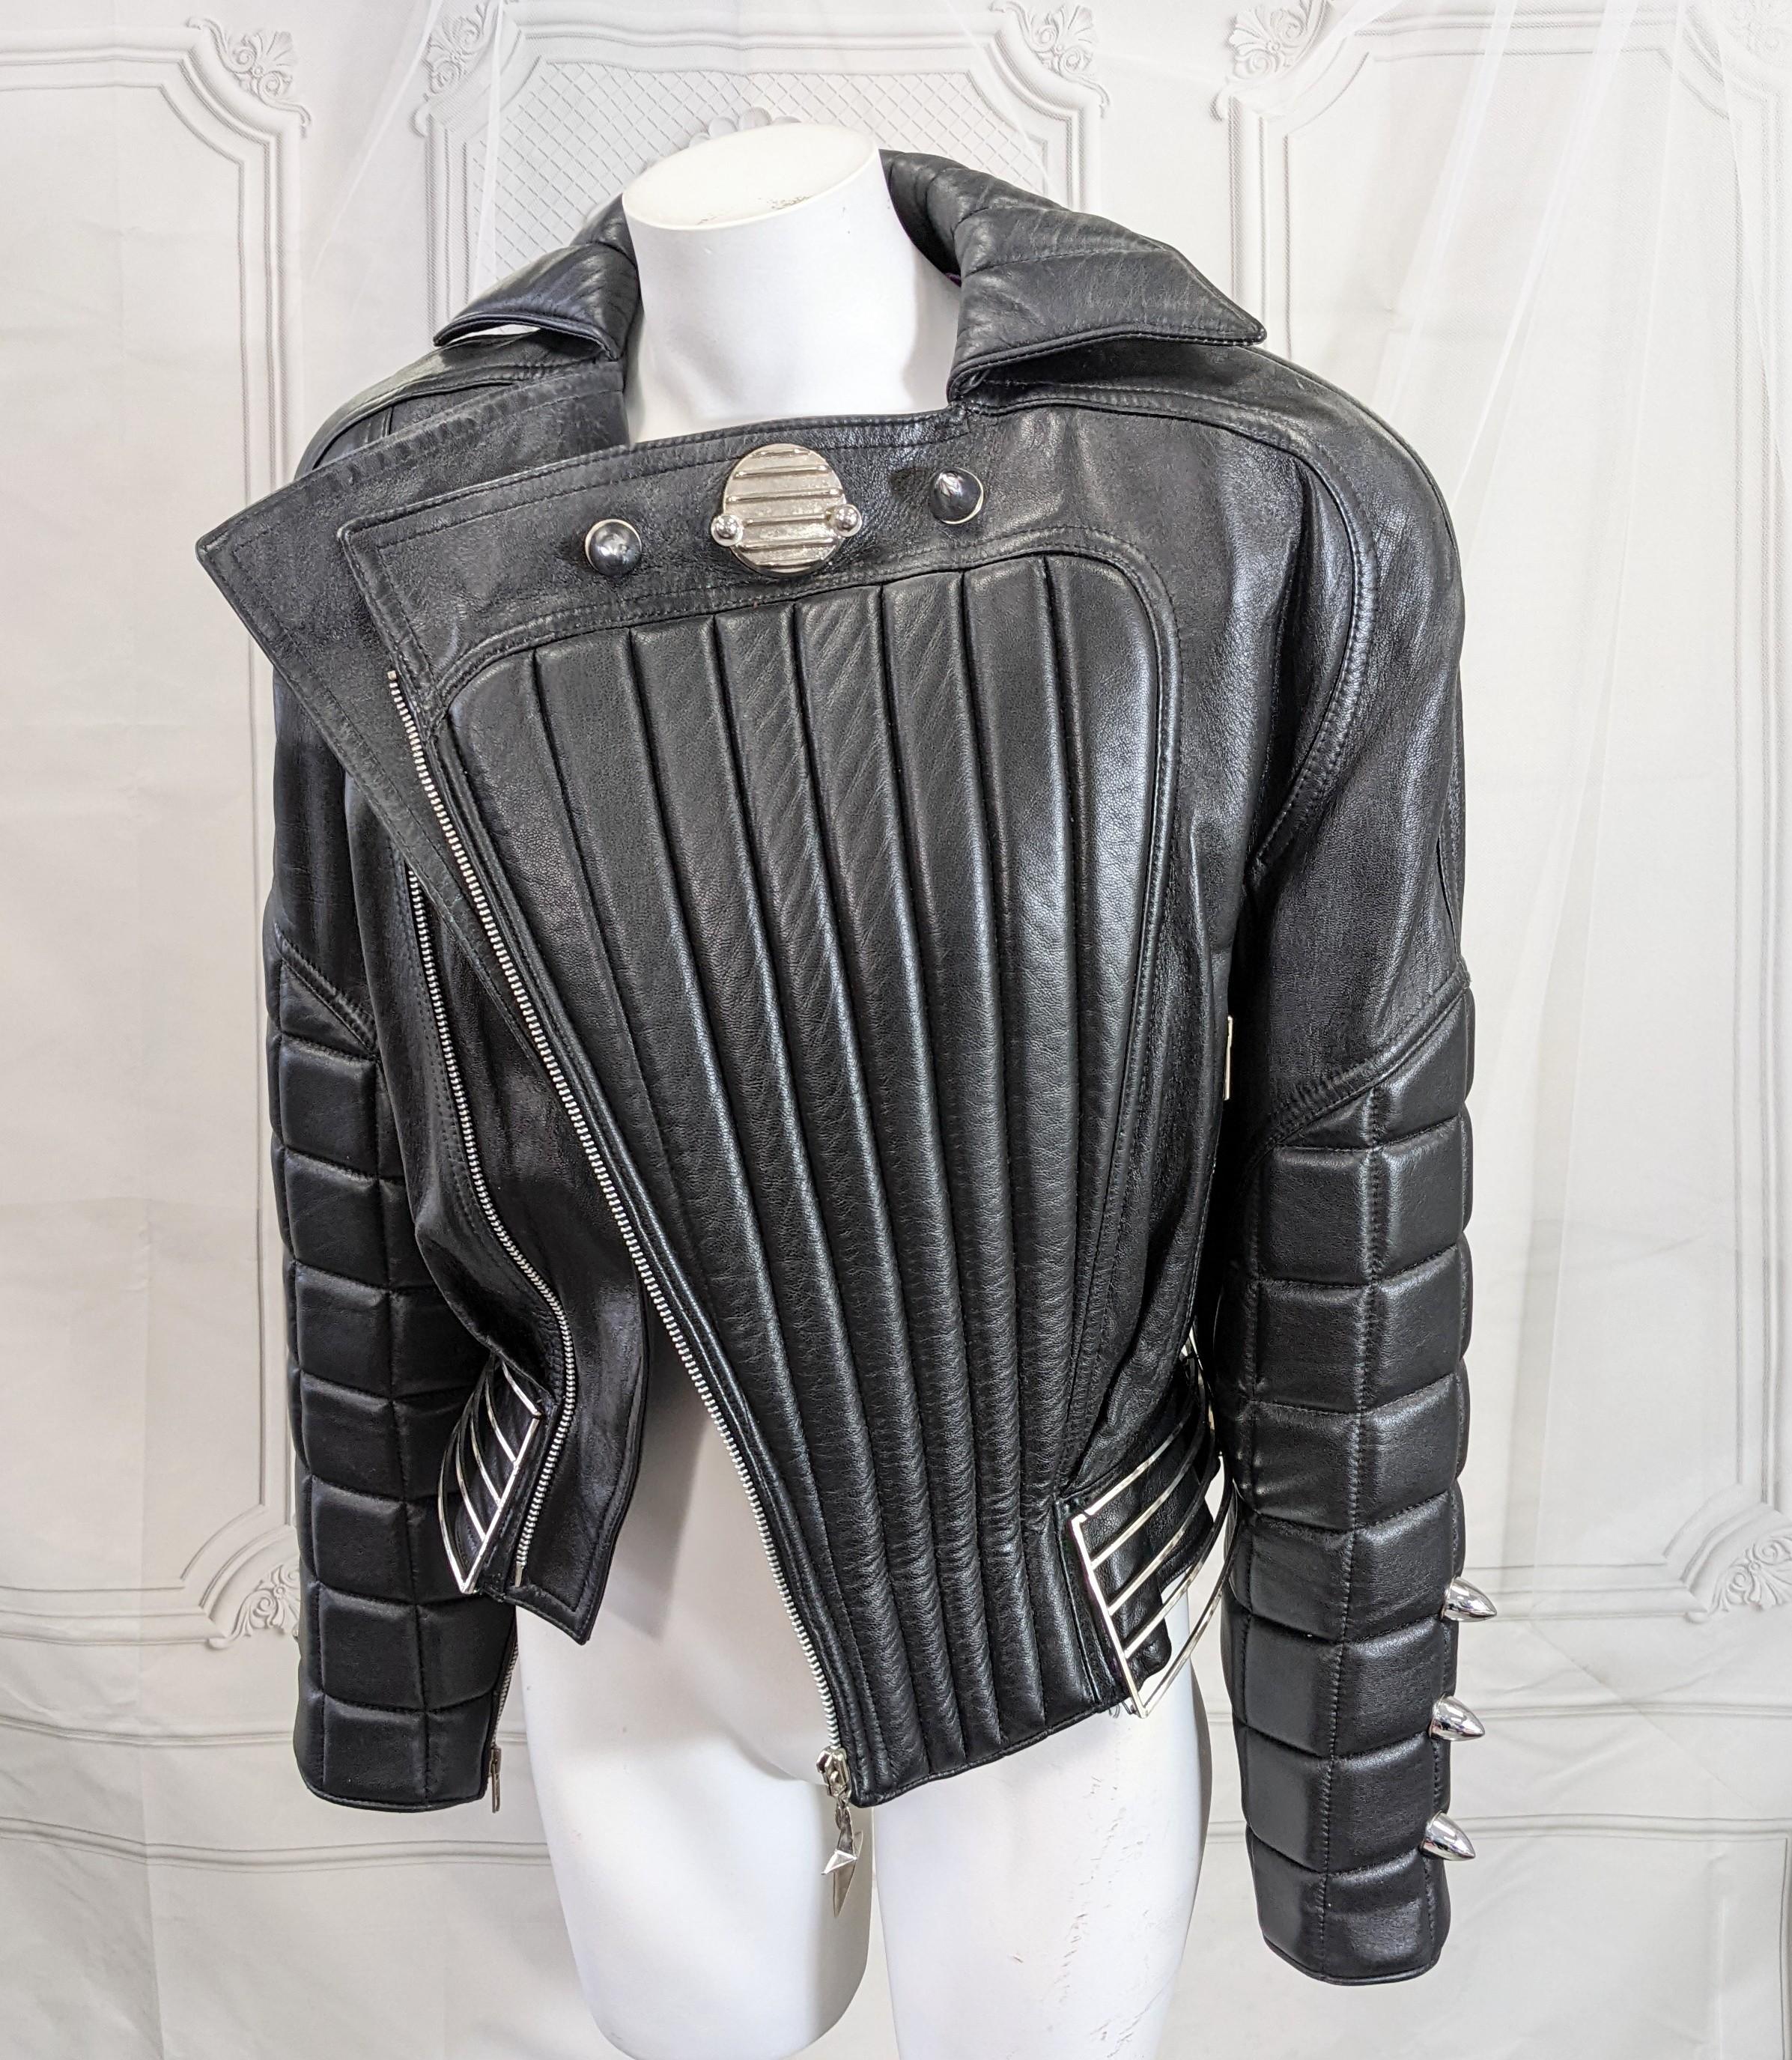  Thierry Mugler Cadillac Grill Padded Motorcycle Jacket, 1989 F/W 2